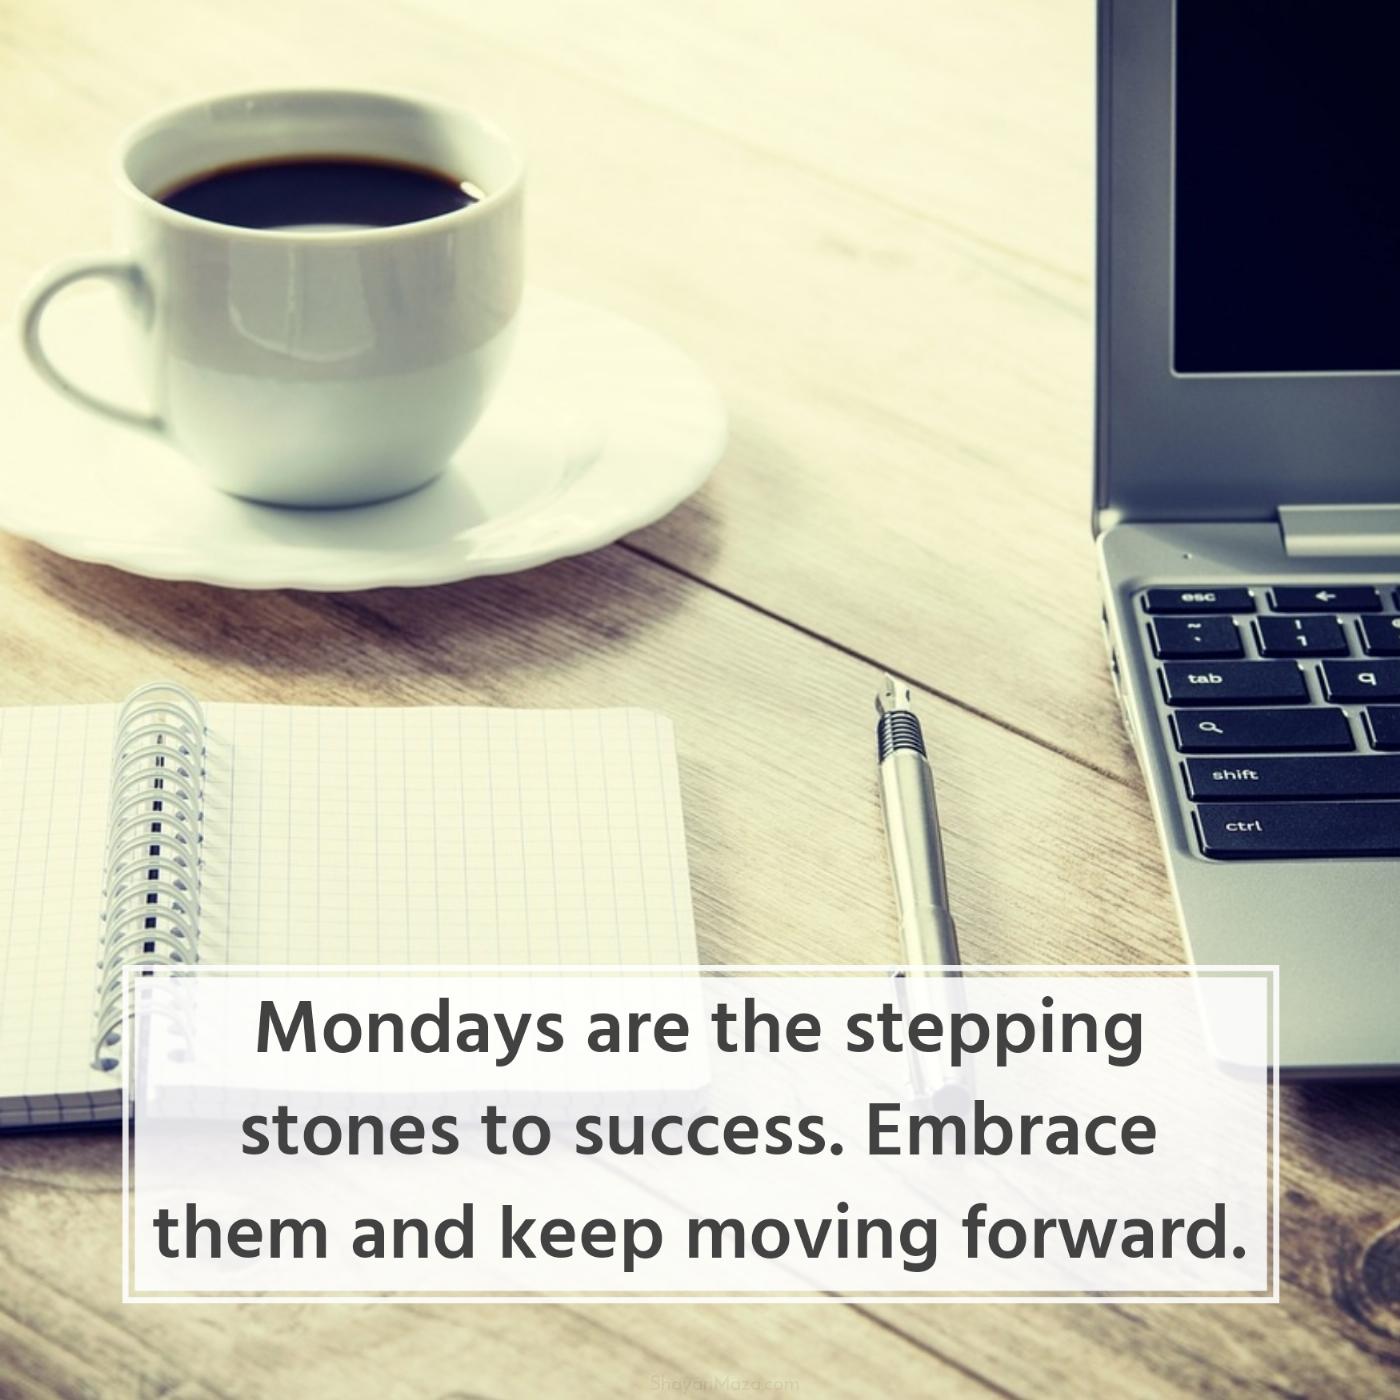 Mondays are the stepping stones to success